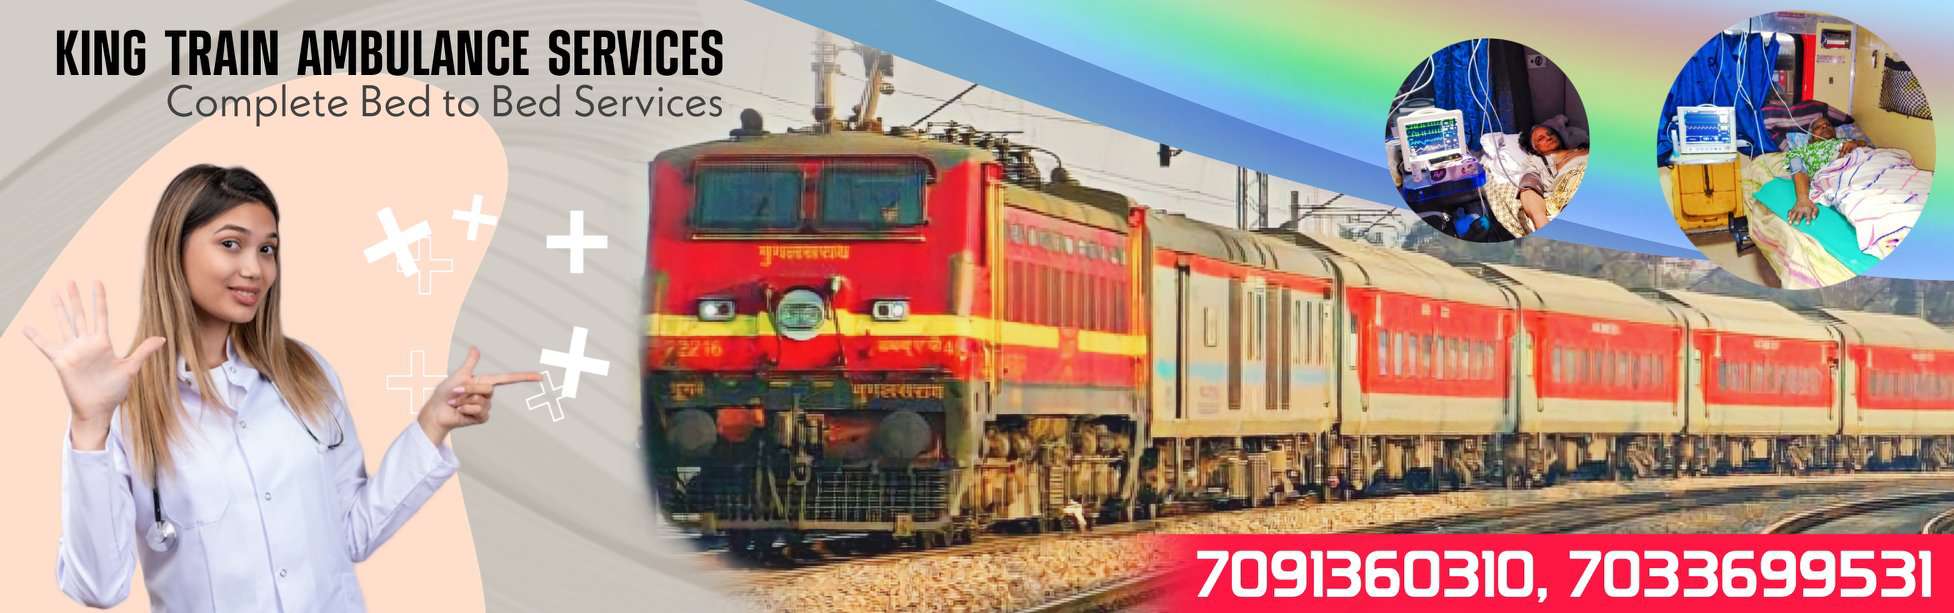 Hire Train Ambulance Services from Mumbai At Lowest Cost